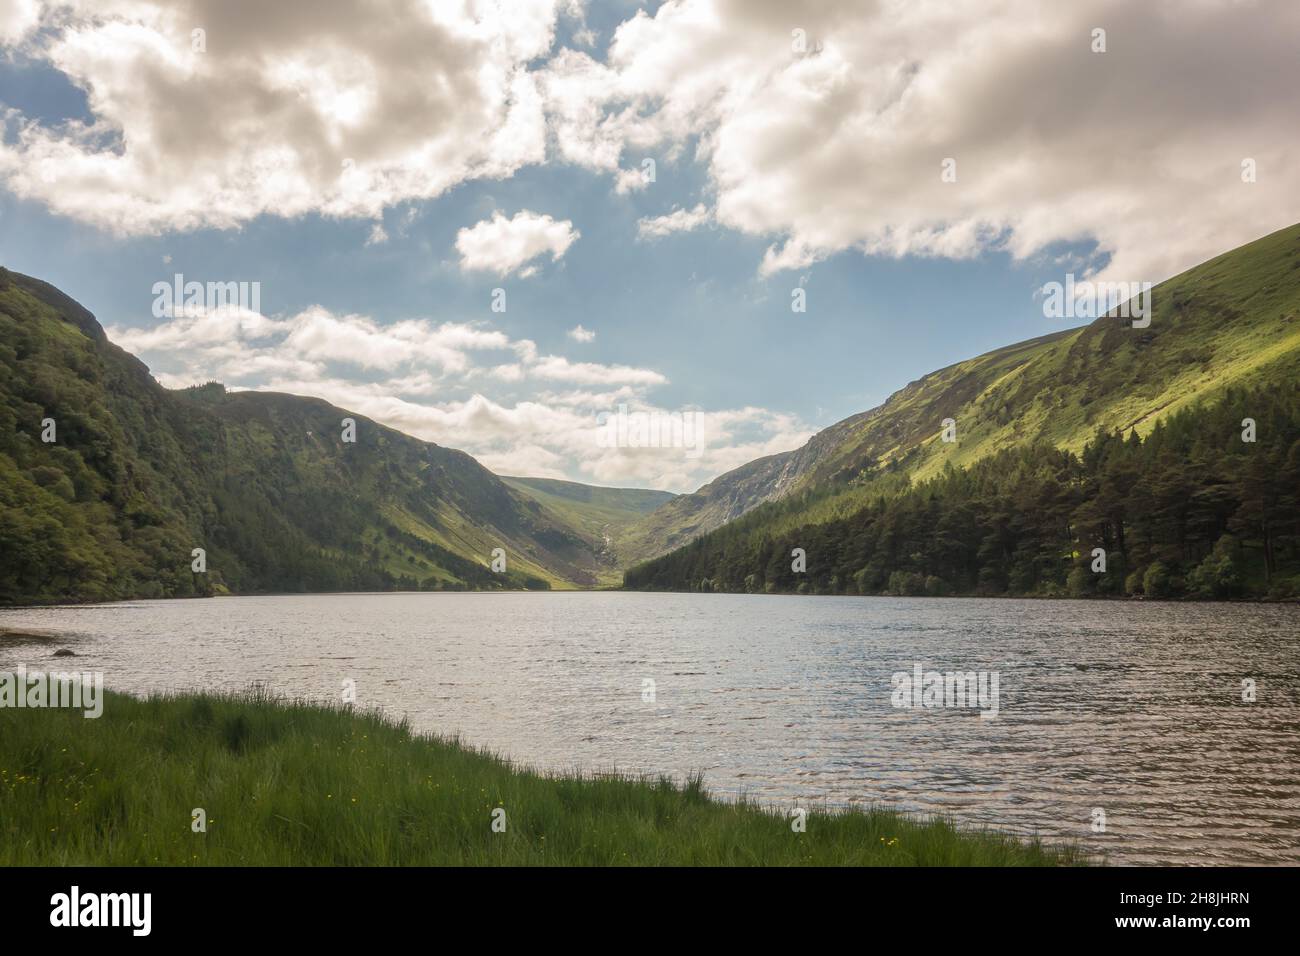 View of the Upper Lake at Glendalough National Park, County Wicklow, Ireland. Stock Photo